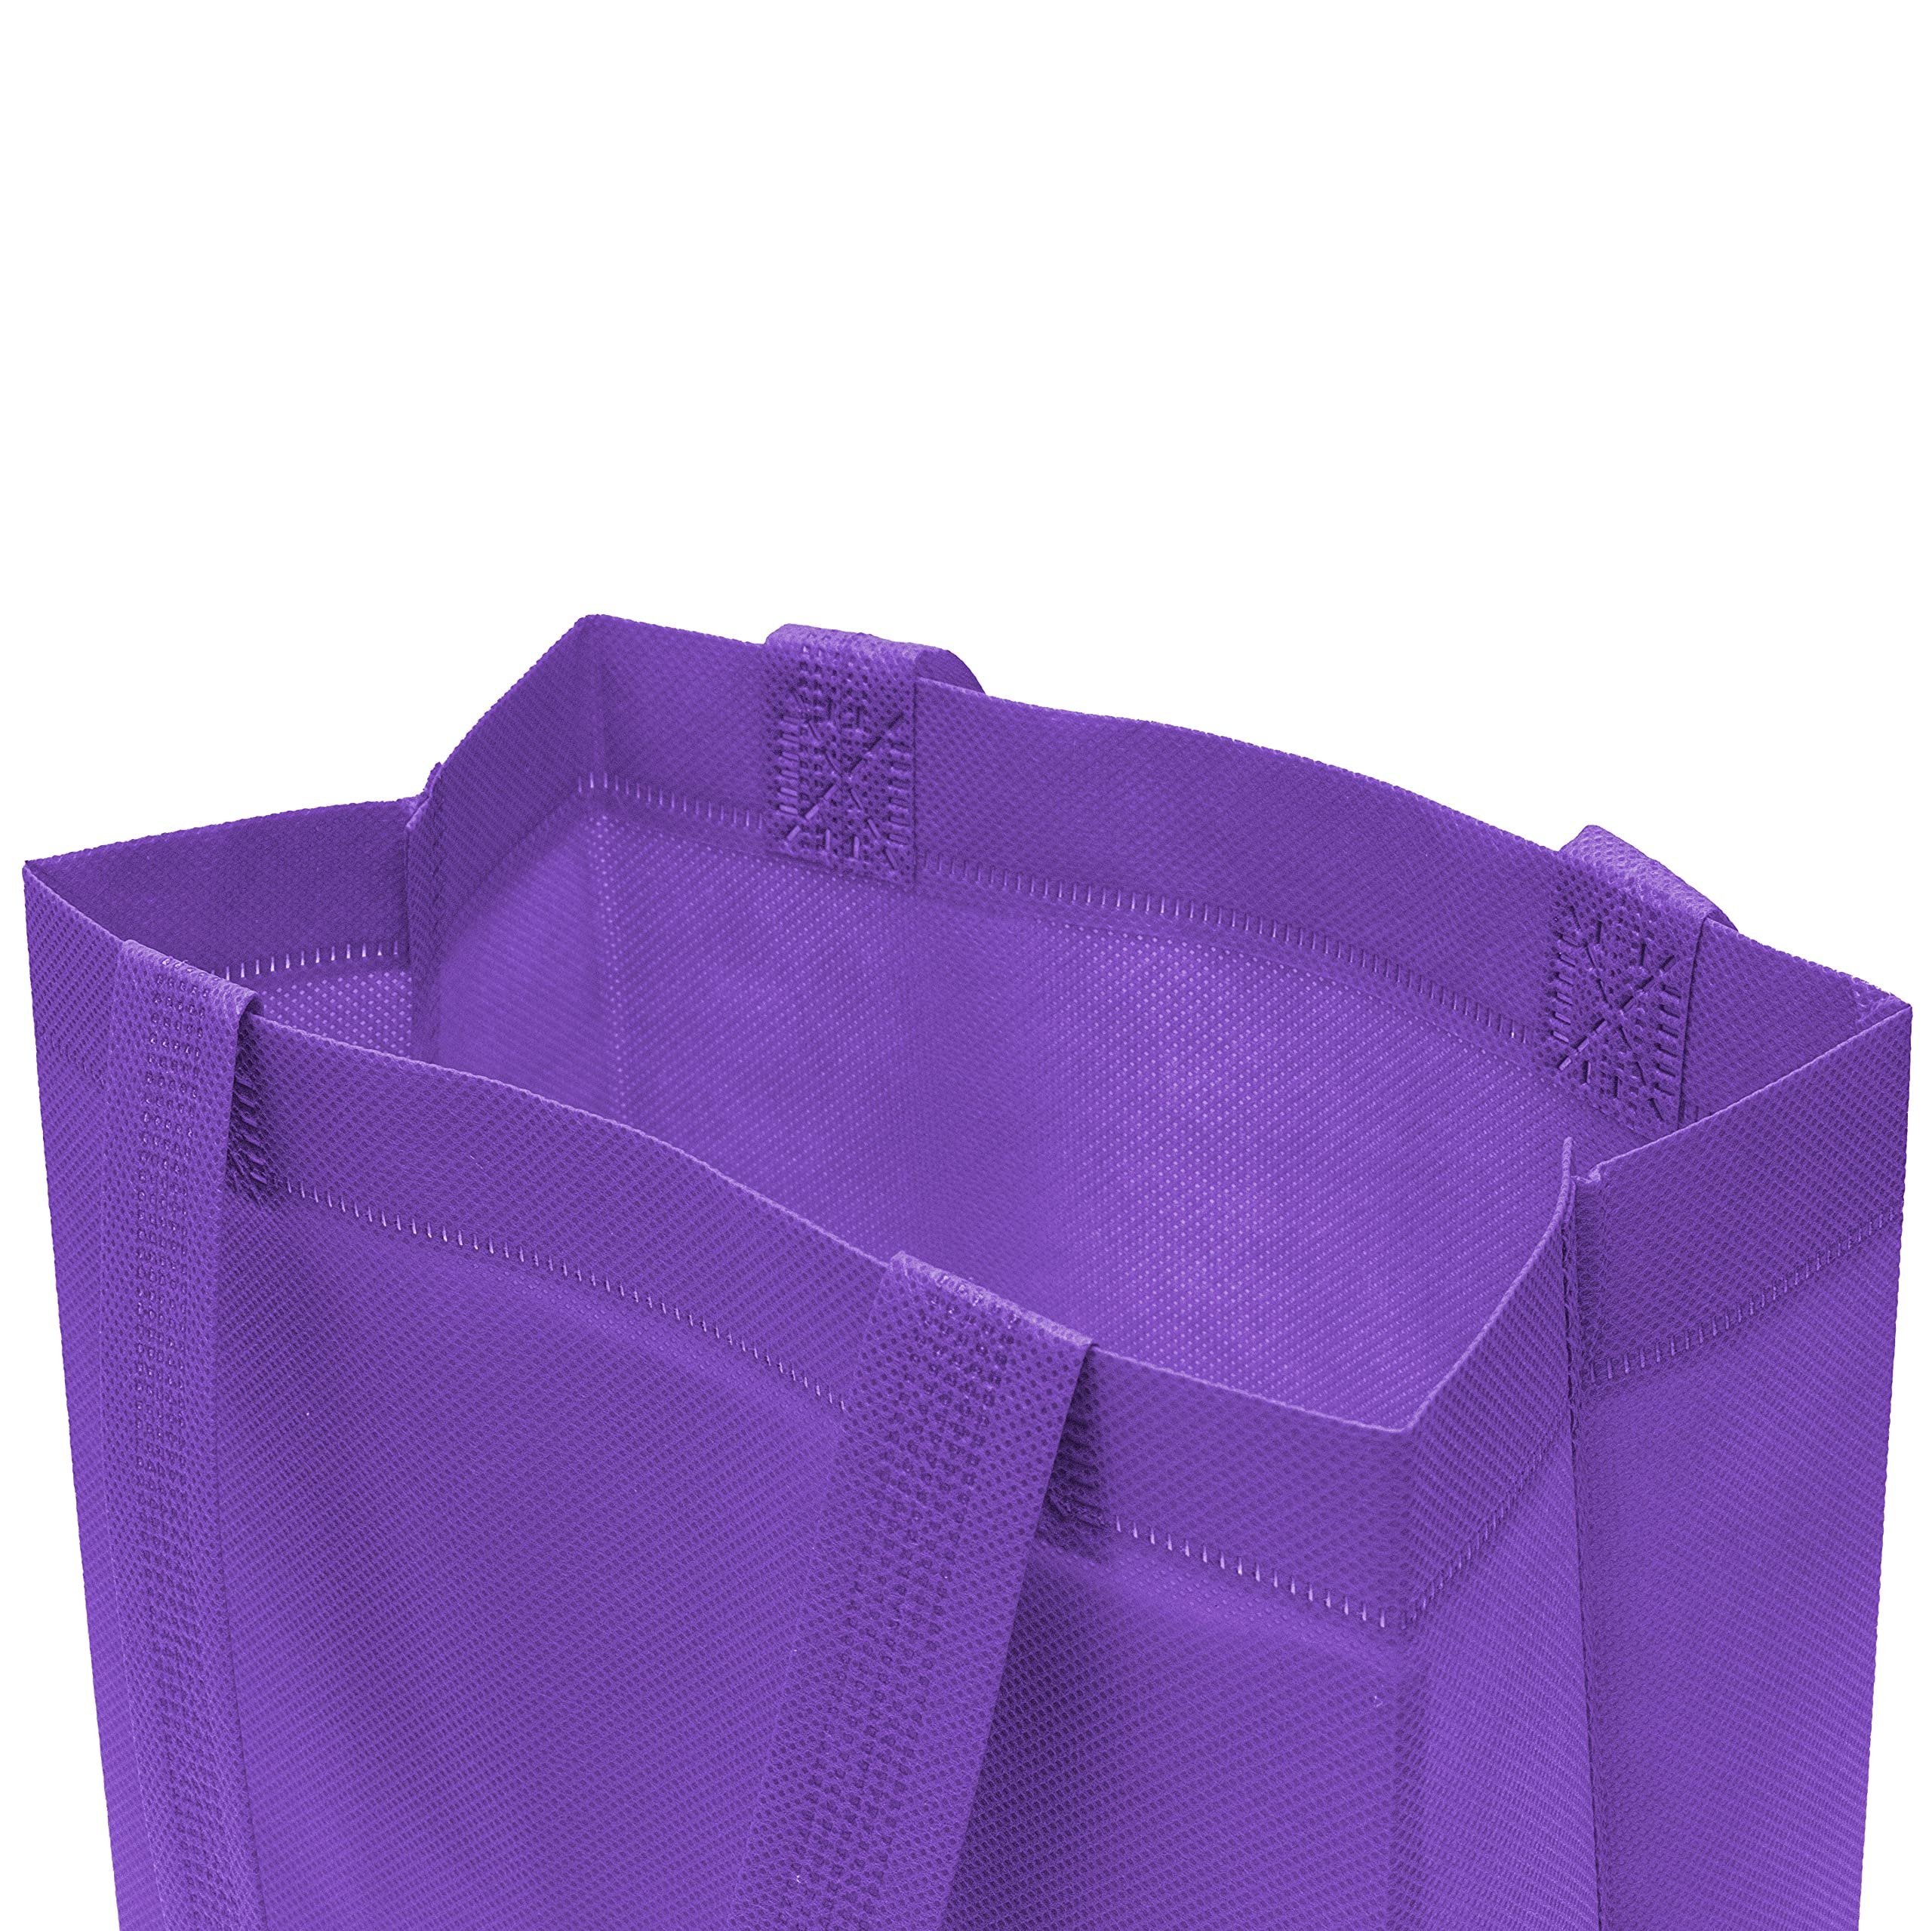 Reusable Gift Bags 12 Pack Small Totes Handles Eco-Friendly Assorted Colors 8x4x10 Inch